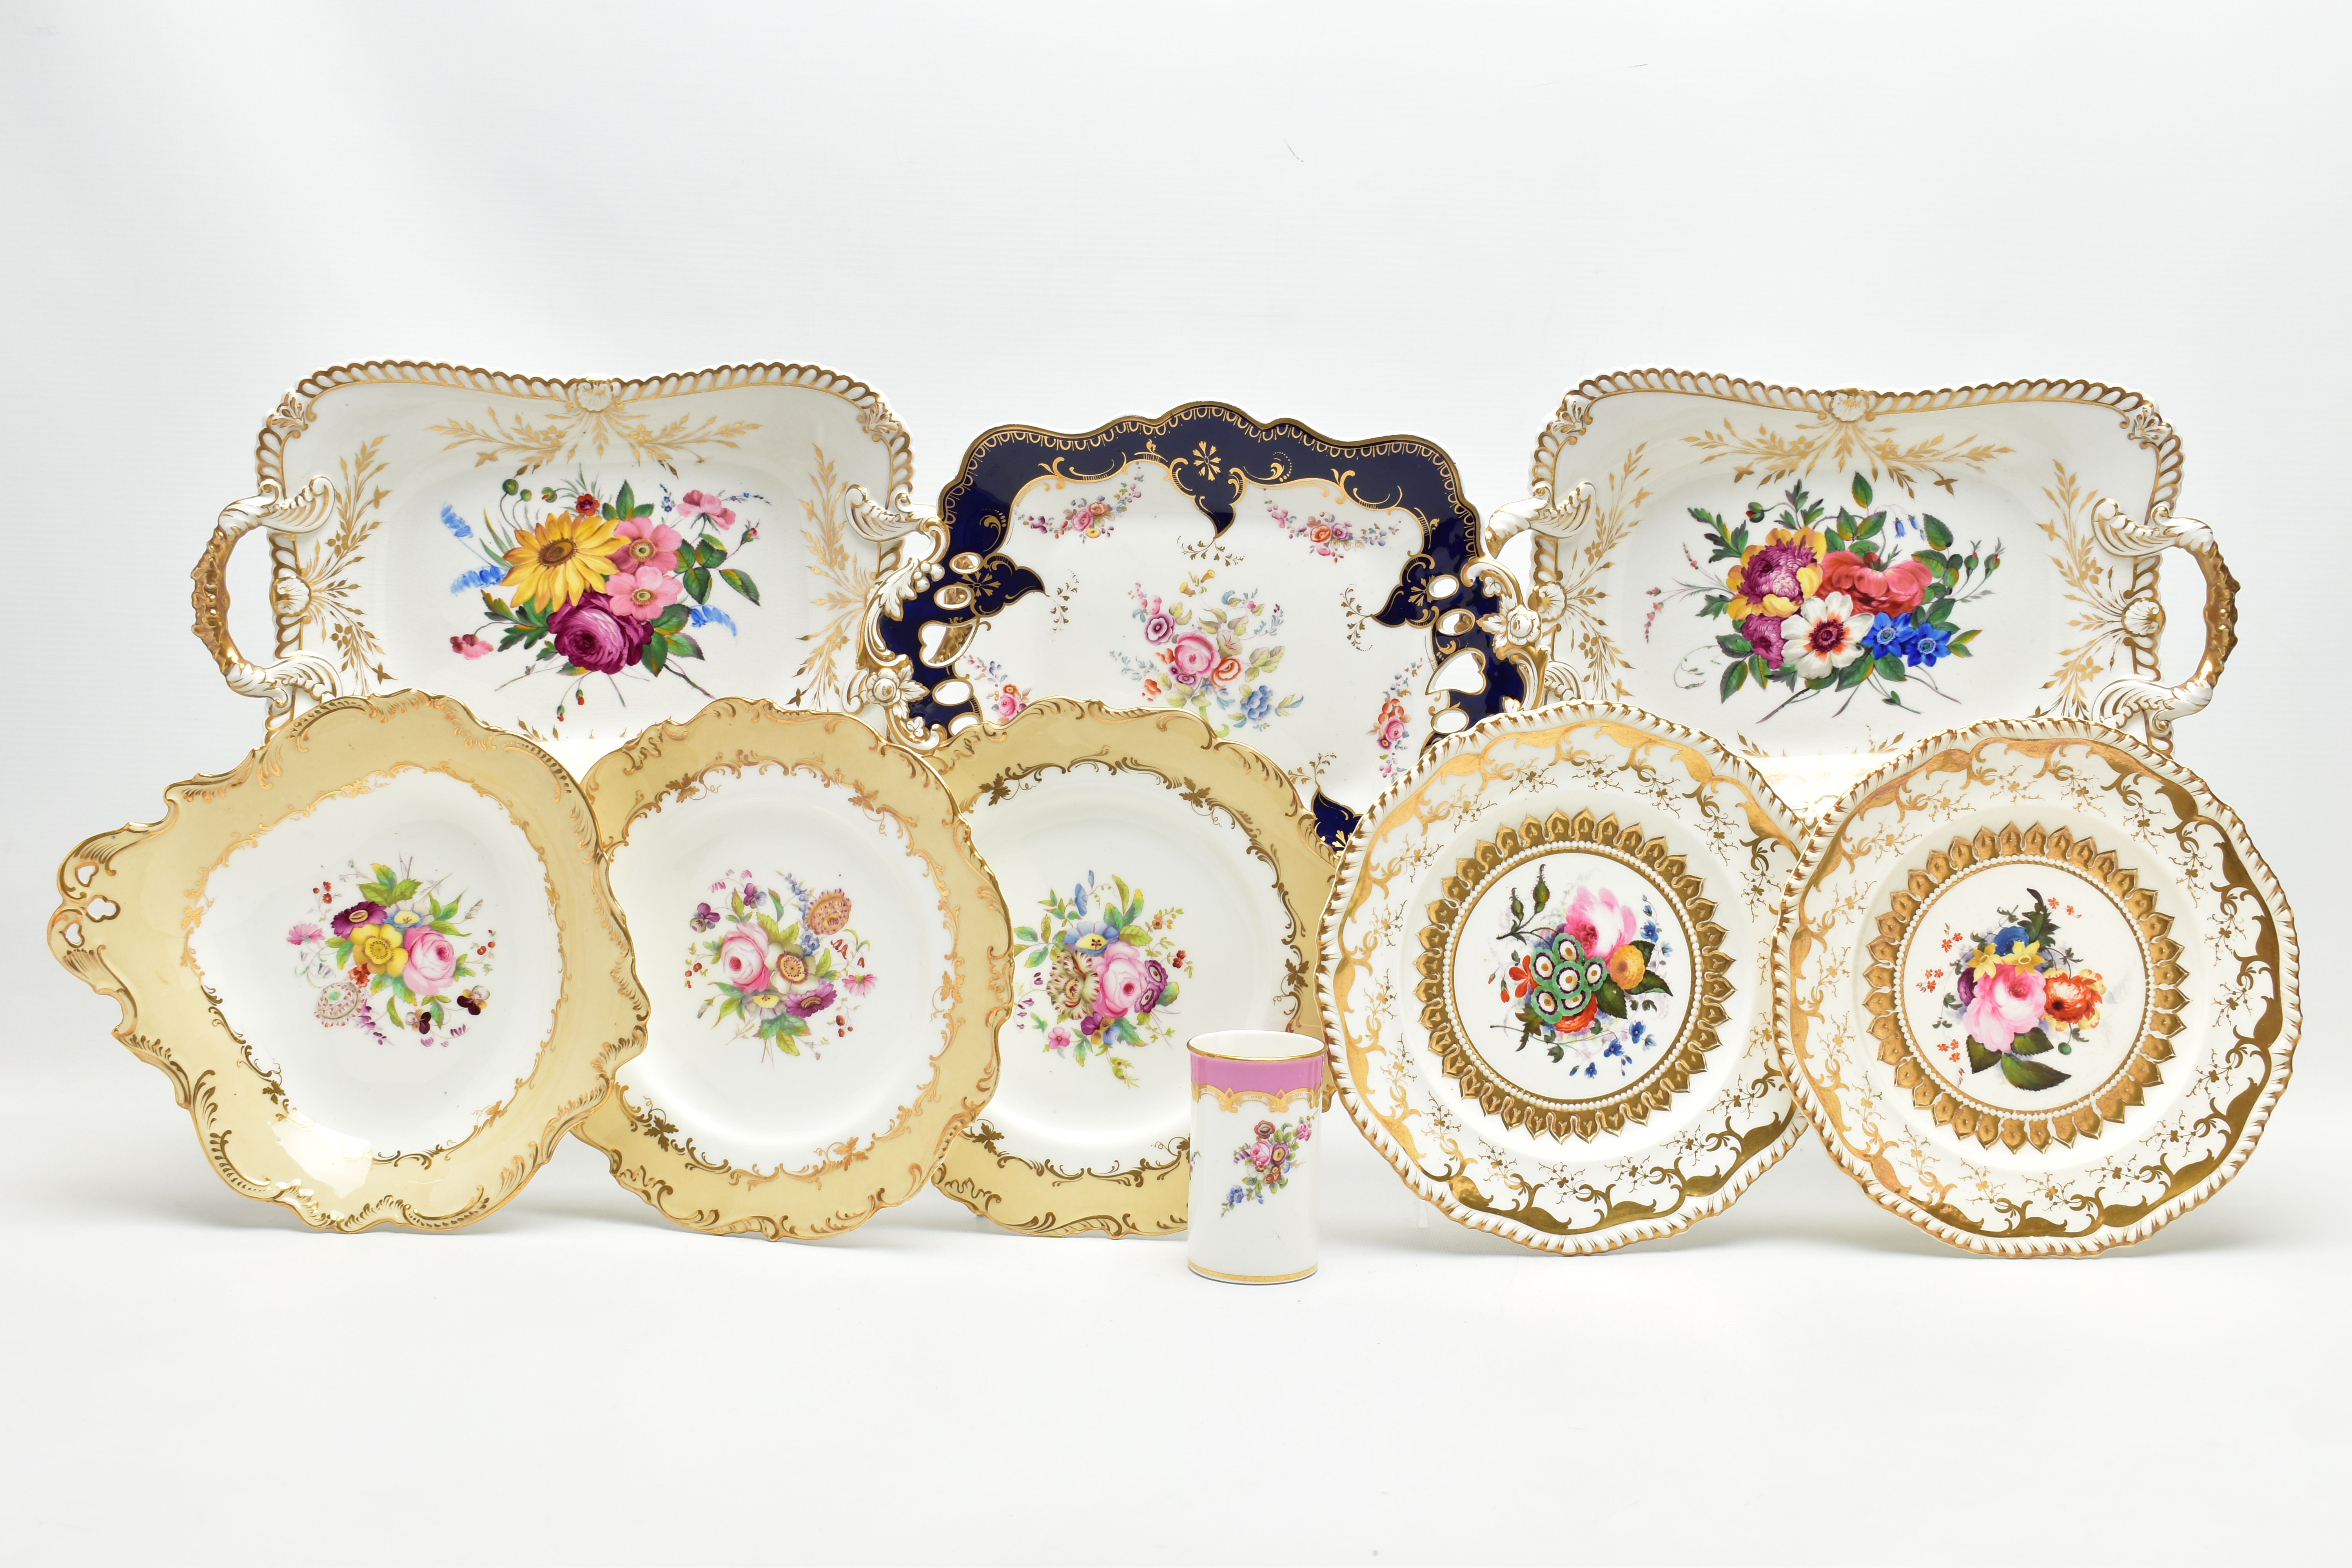 NINE PIECES OF MID TO LATE 19TH CENTURY BRITISH PORCELAIN, comprising a pair of Chamberlains twin